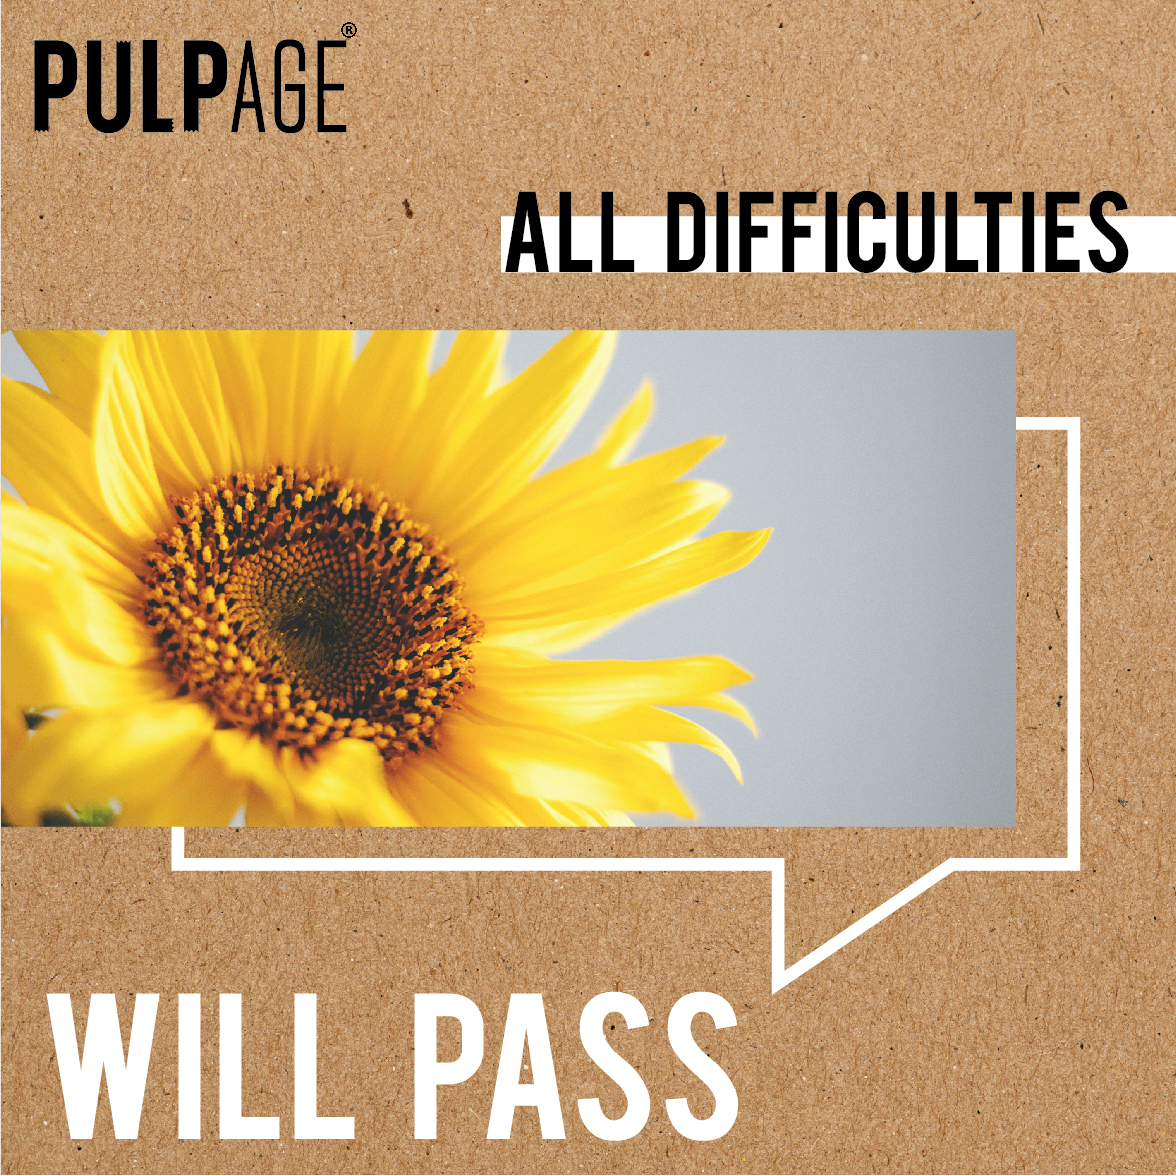 All difficulties will pass